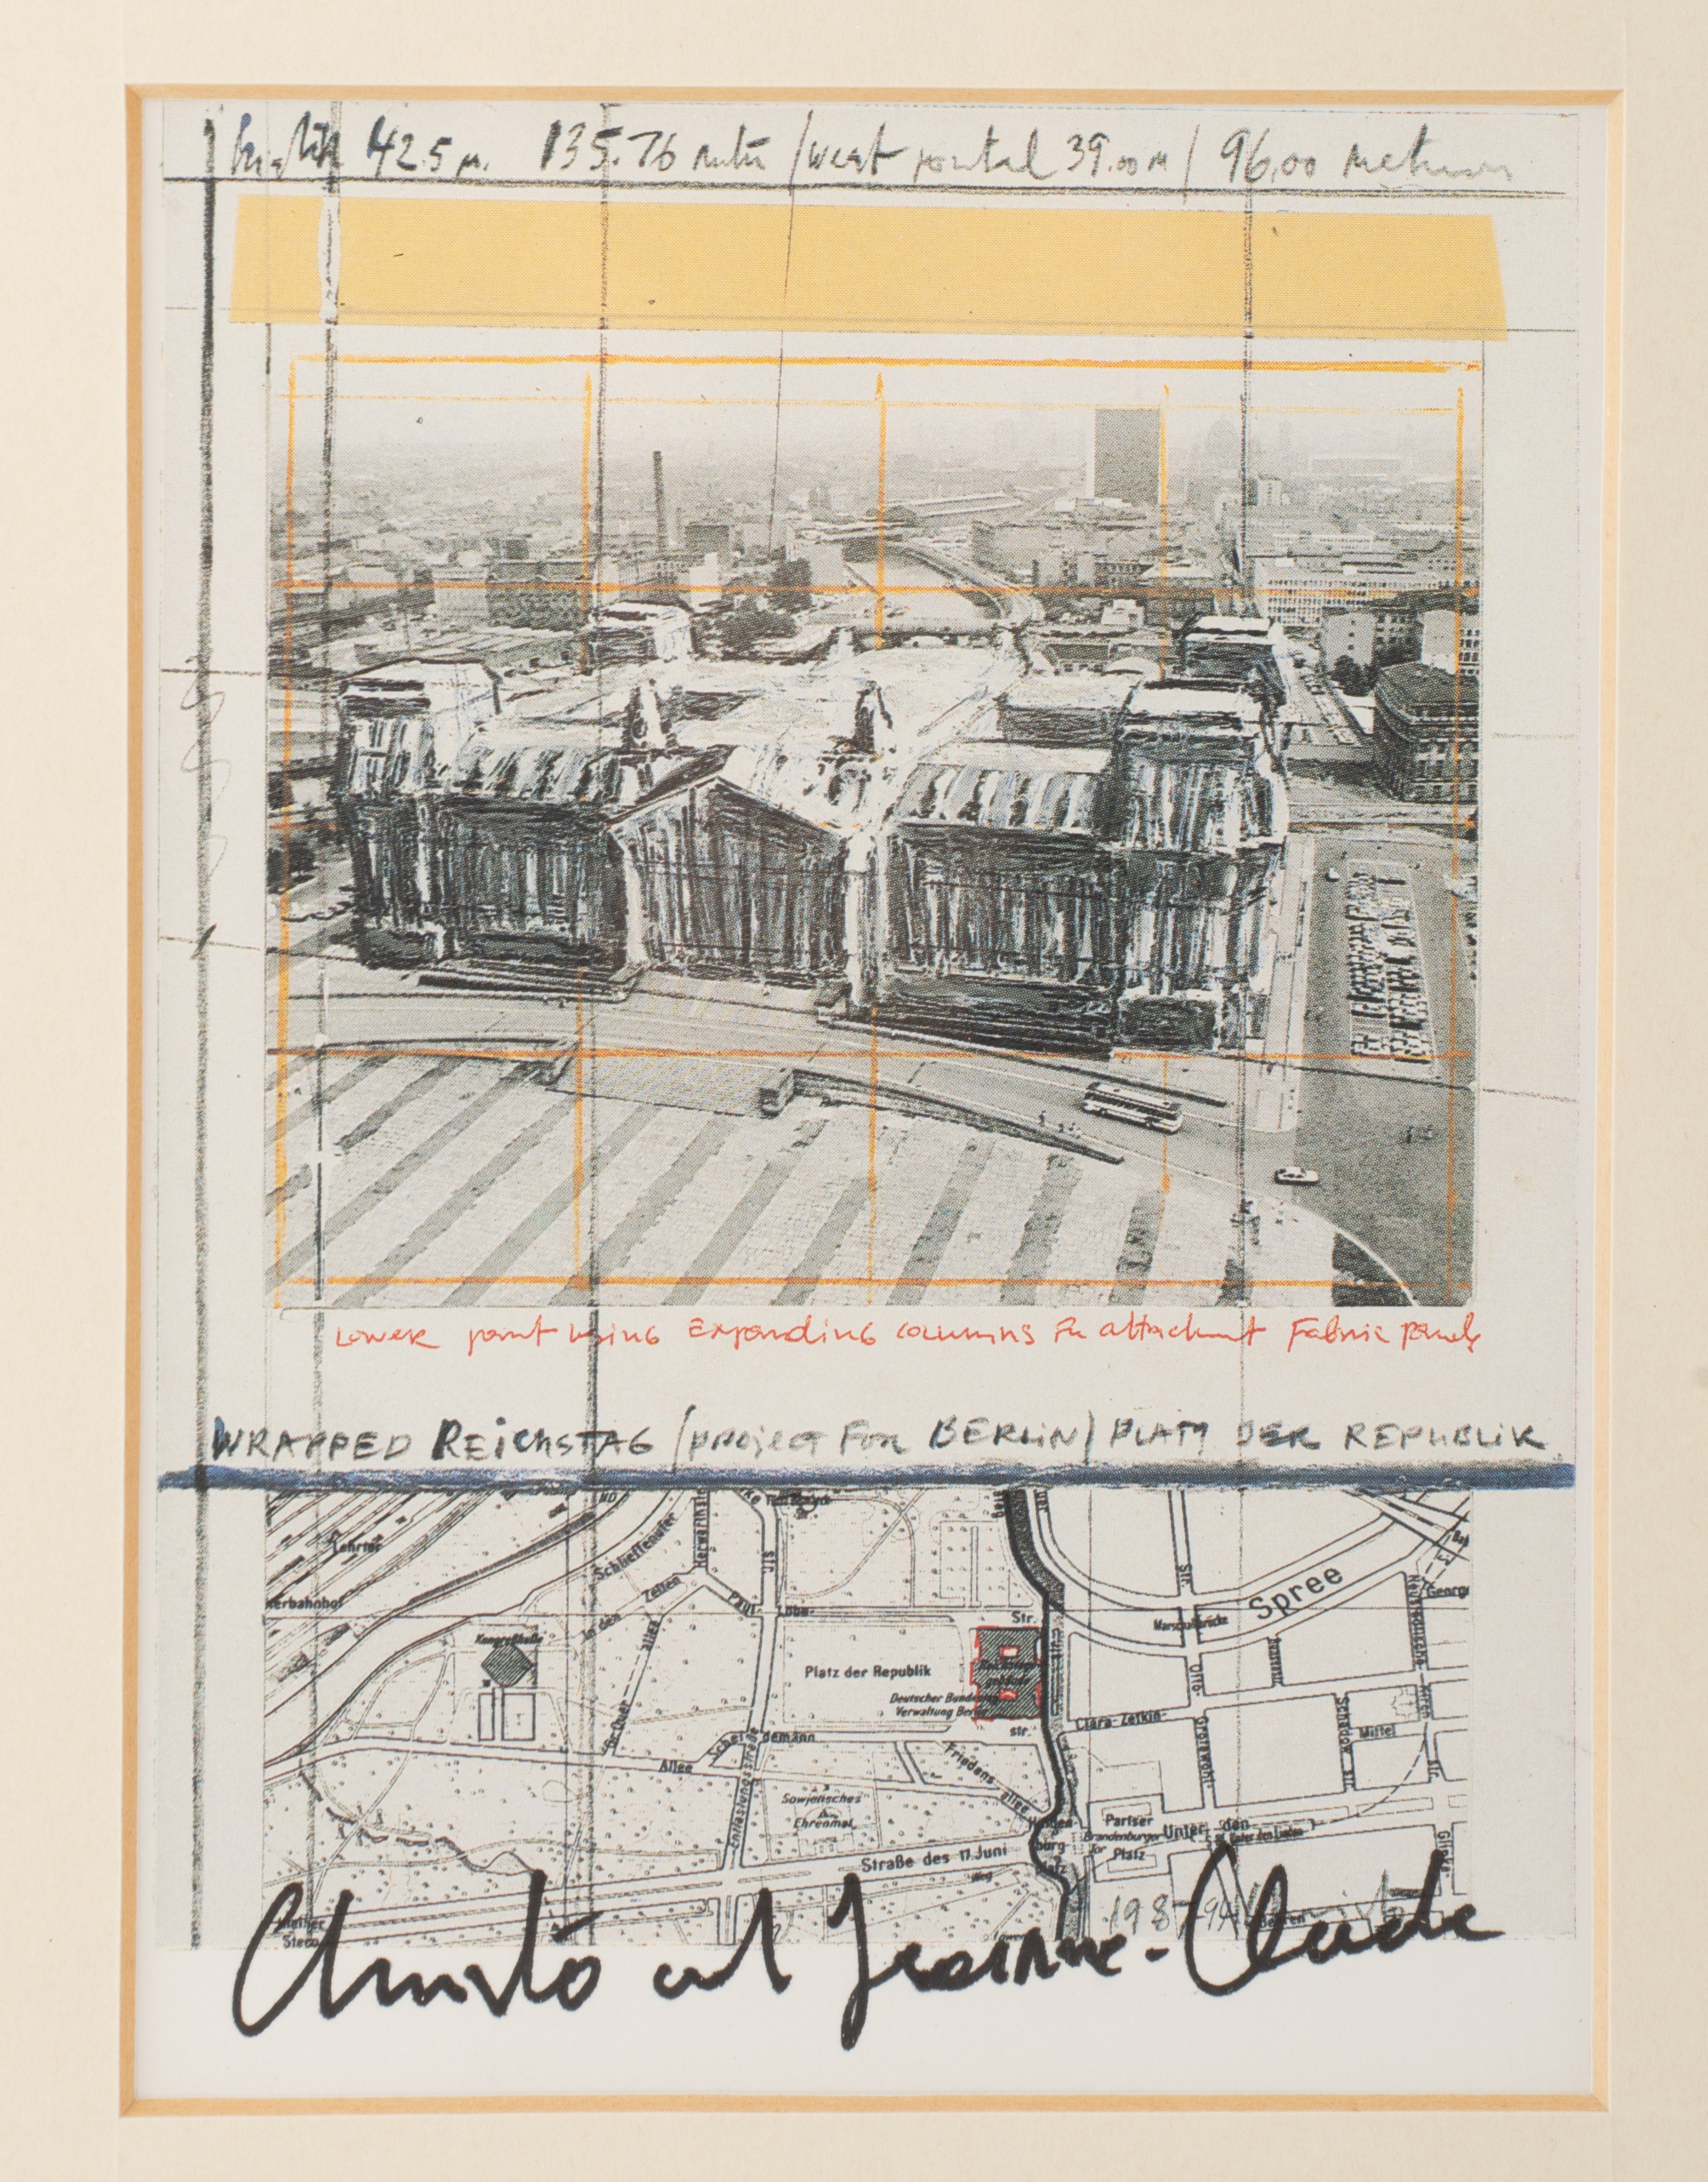 (BIDDING ONLY ON CARLOBONTE.BE) Christo and Jeanne-Claude, three signed offsets of their famous proj - Image 7 of 8